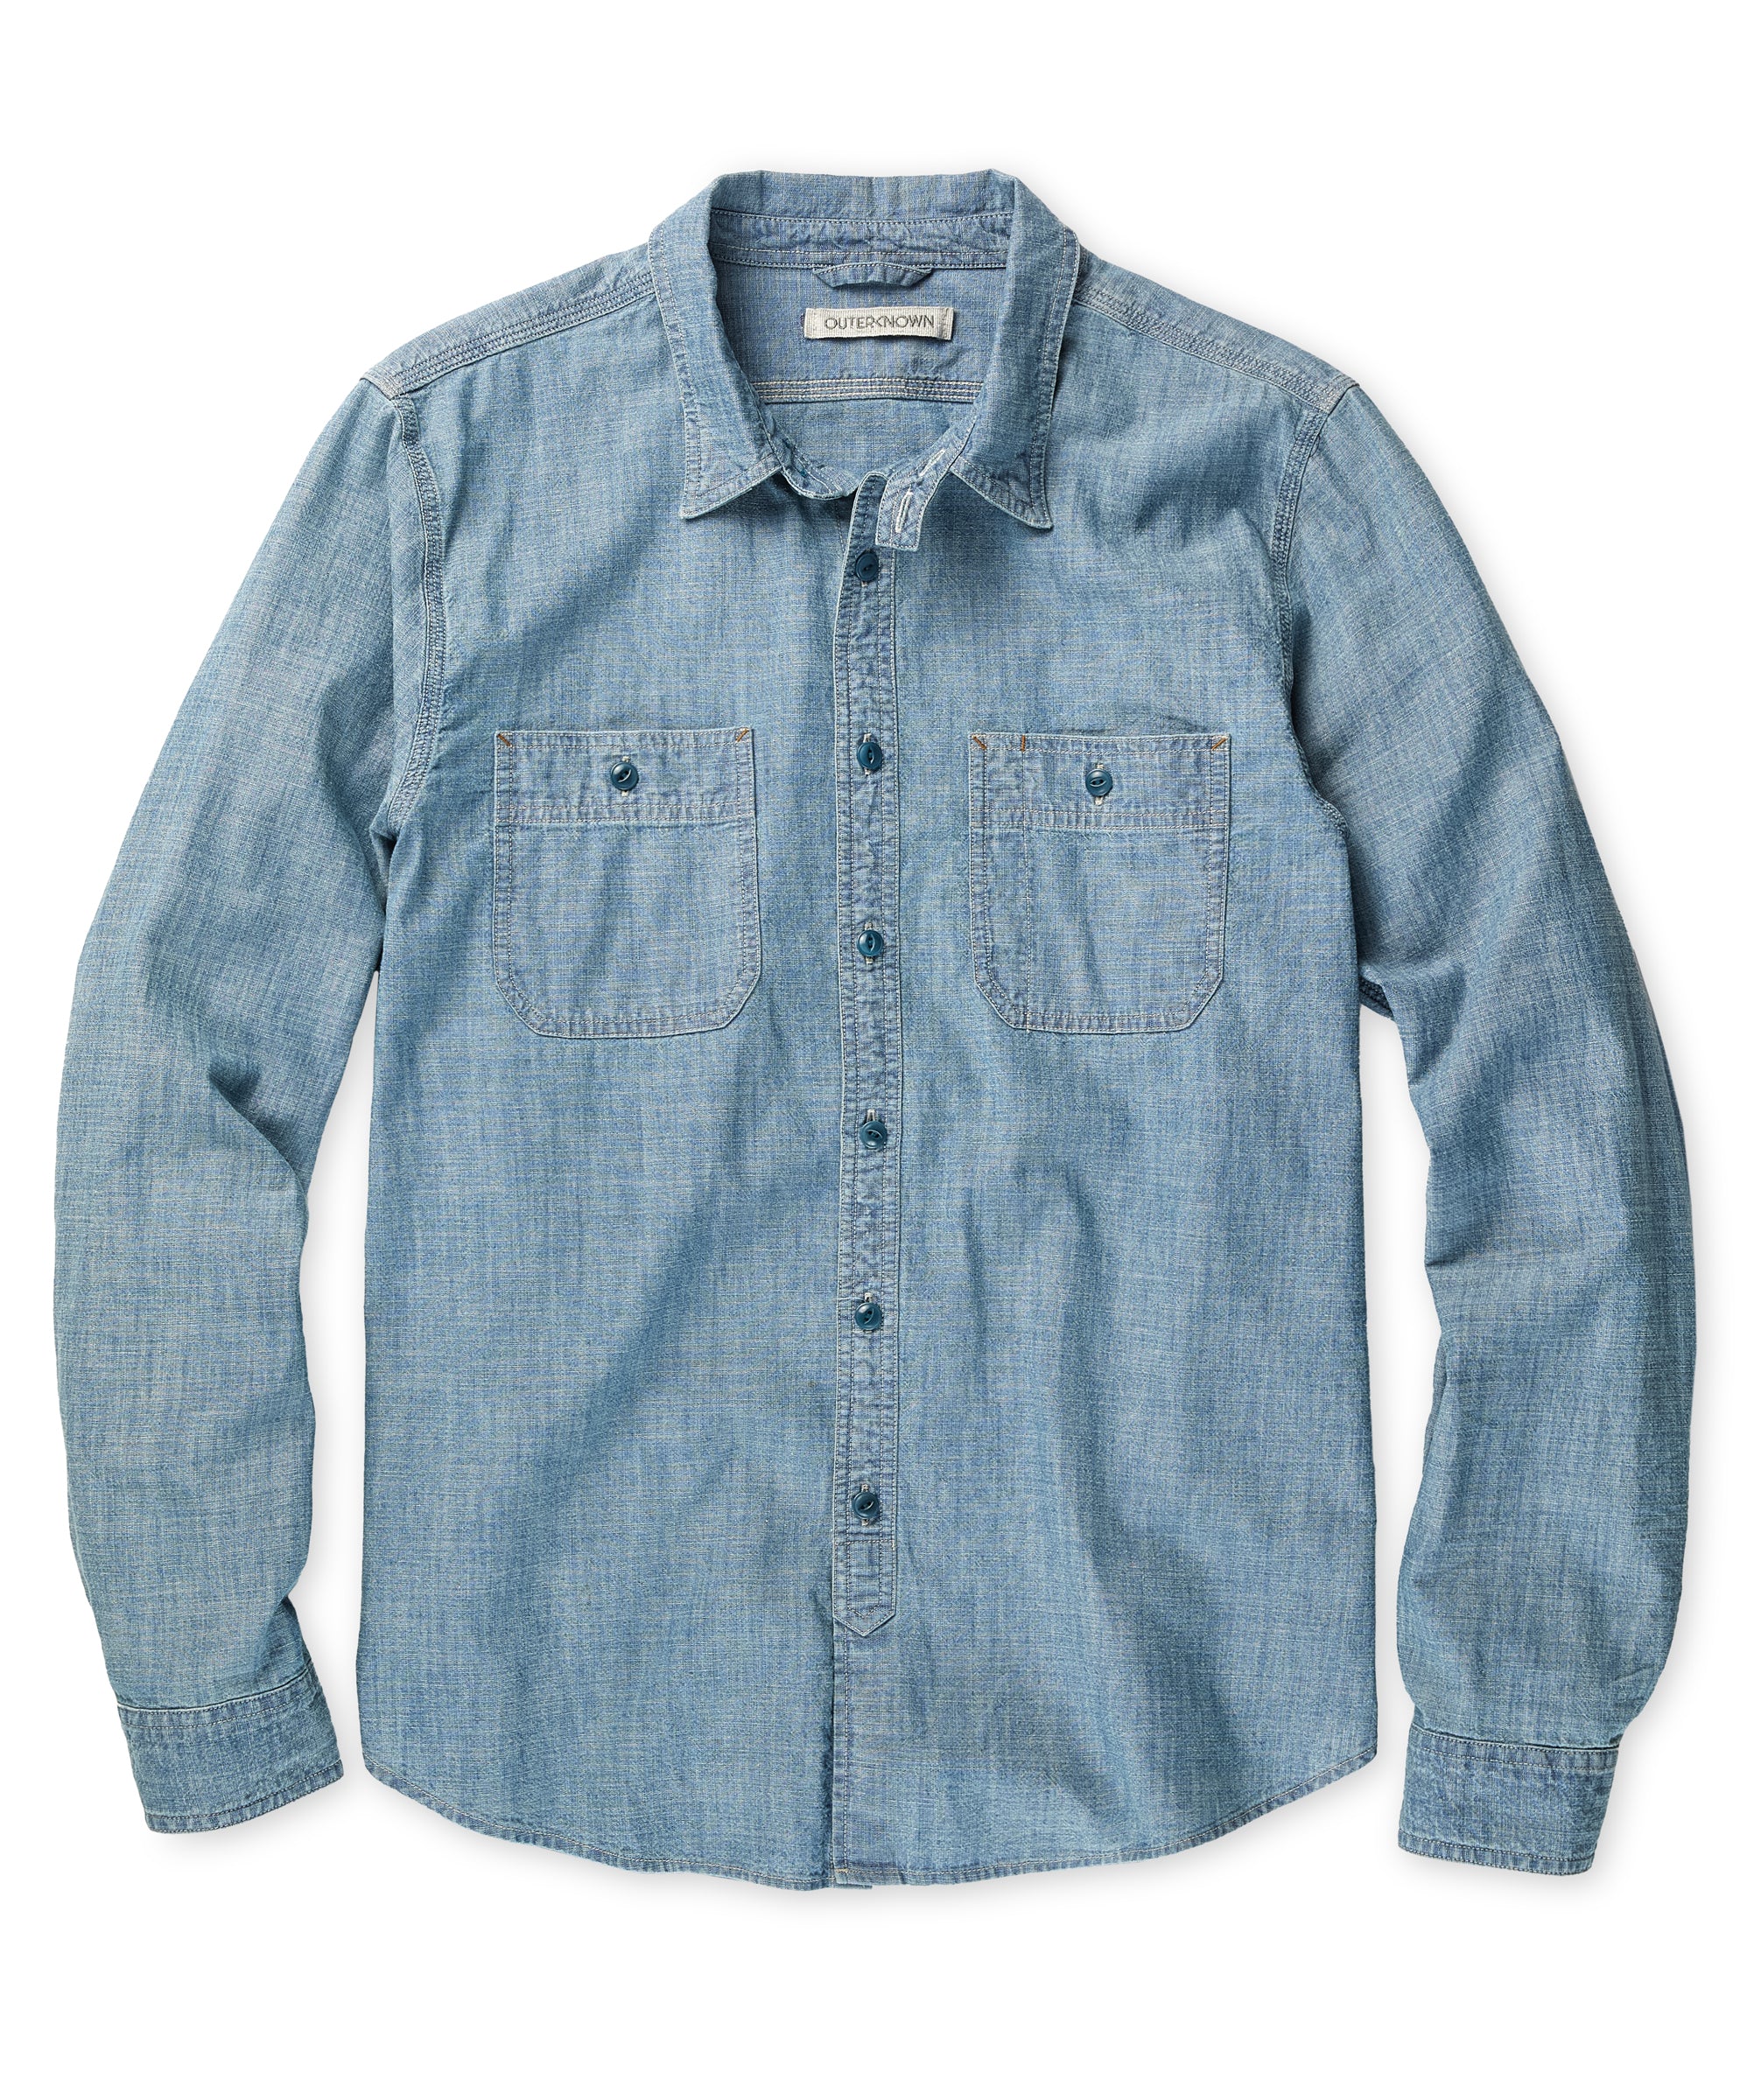 Chambray Utility Shirt | Men's Shirts | Outerknown